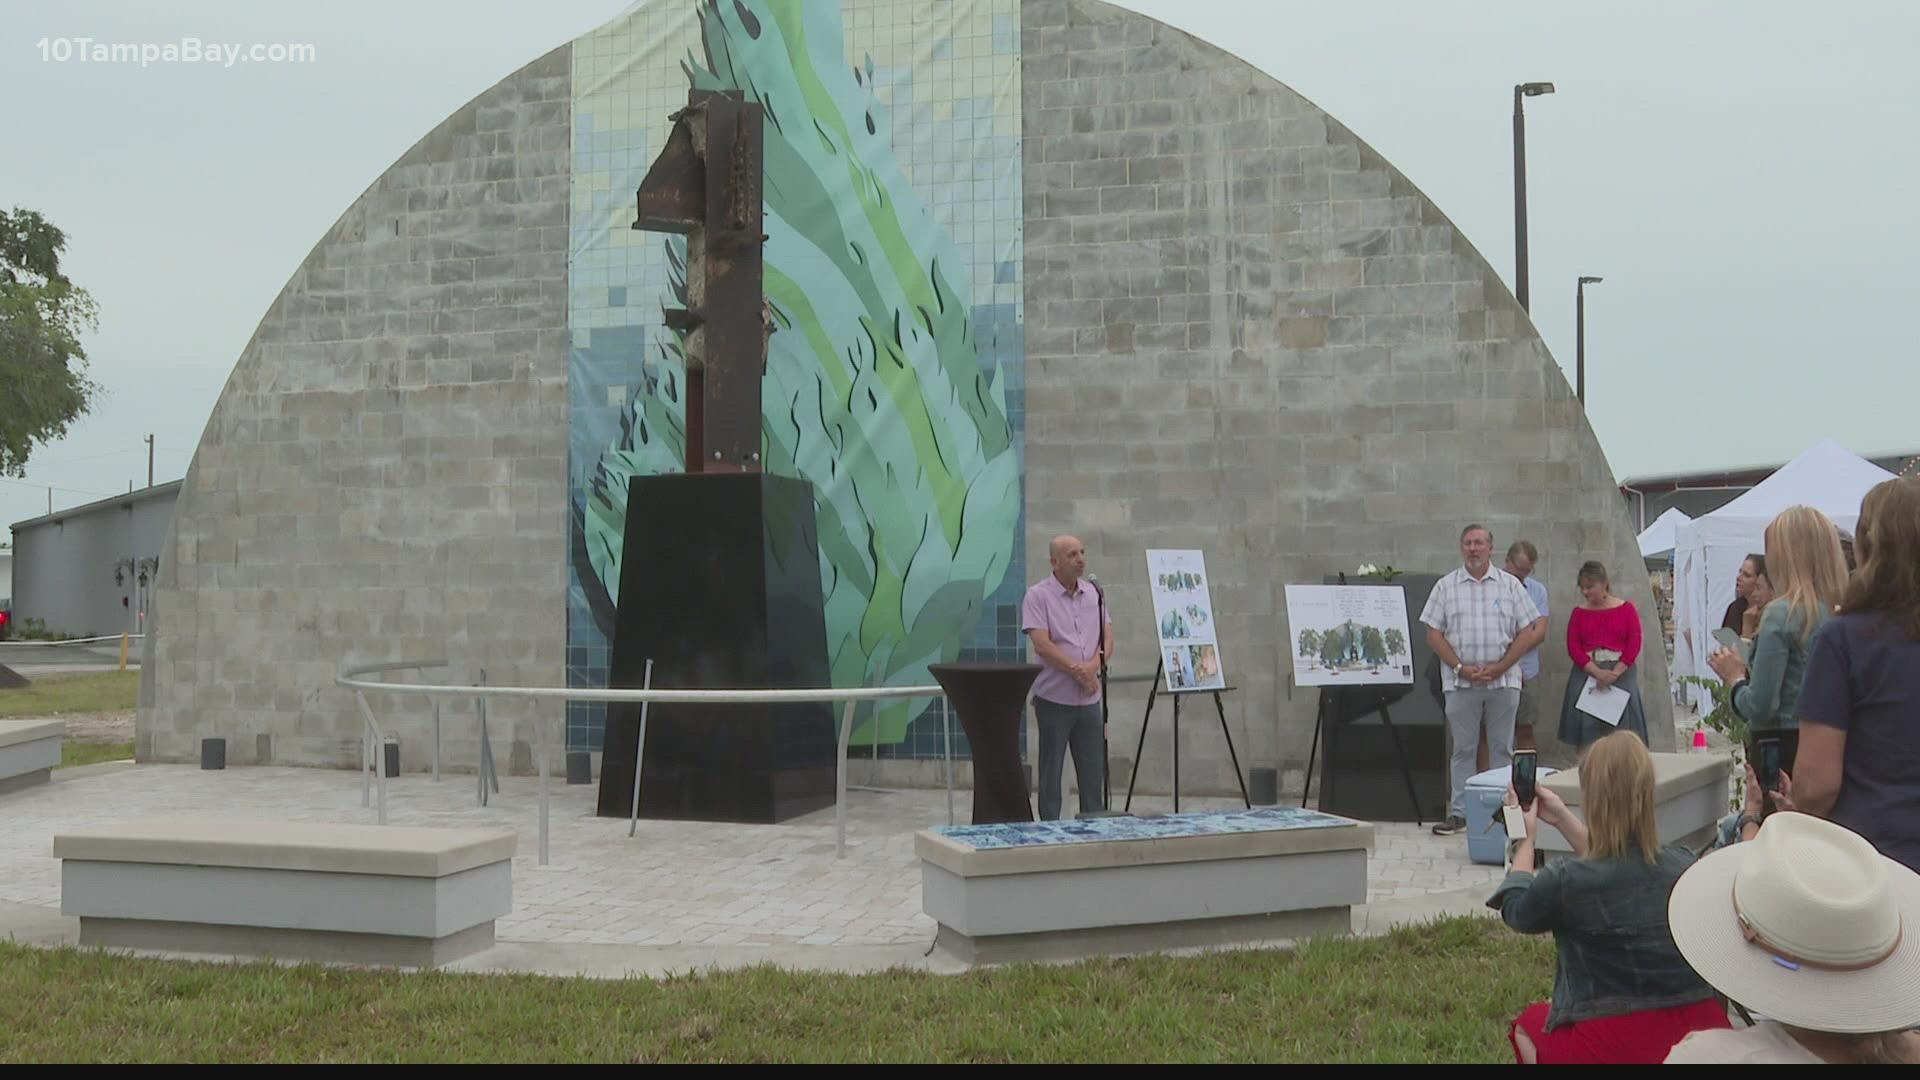 A sculpture to commemorate the lives lost 20 years ago on Sept. 11 will be unveiled in the Warehouse Arts District in St. Pete.